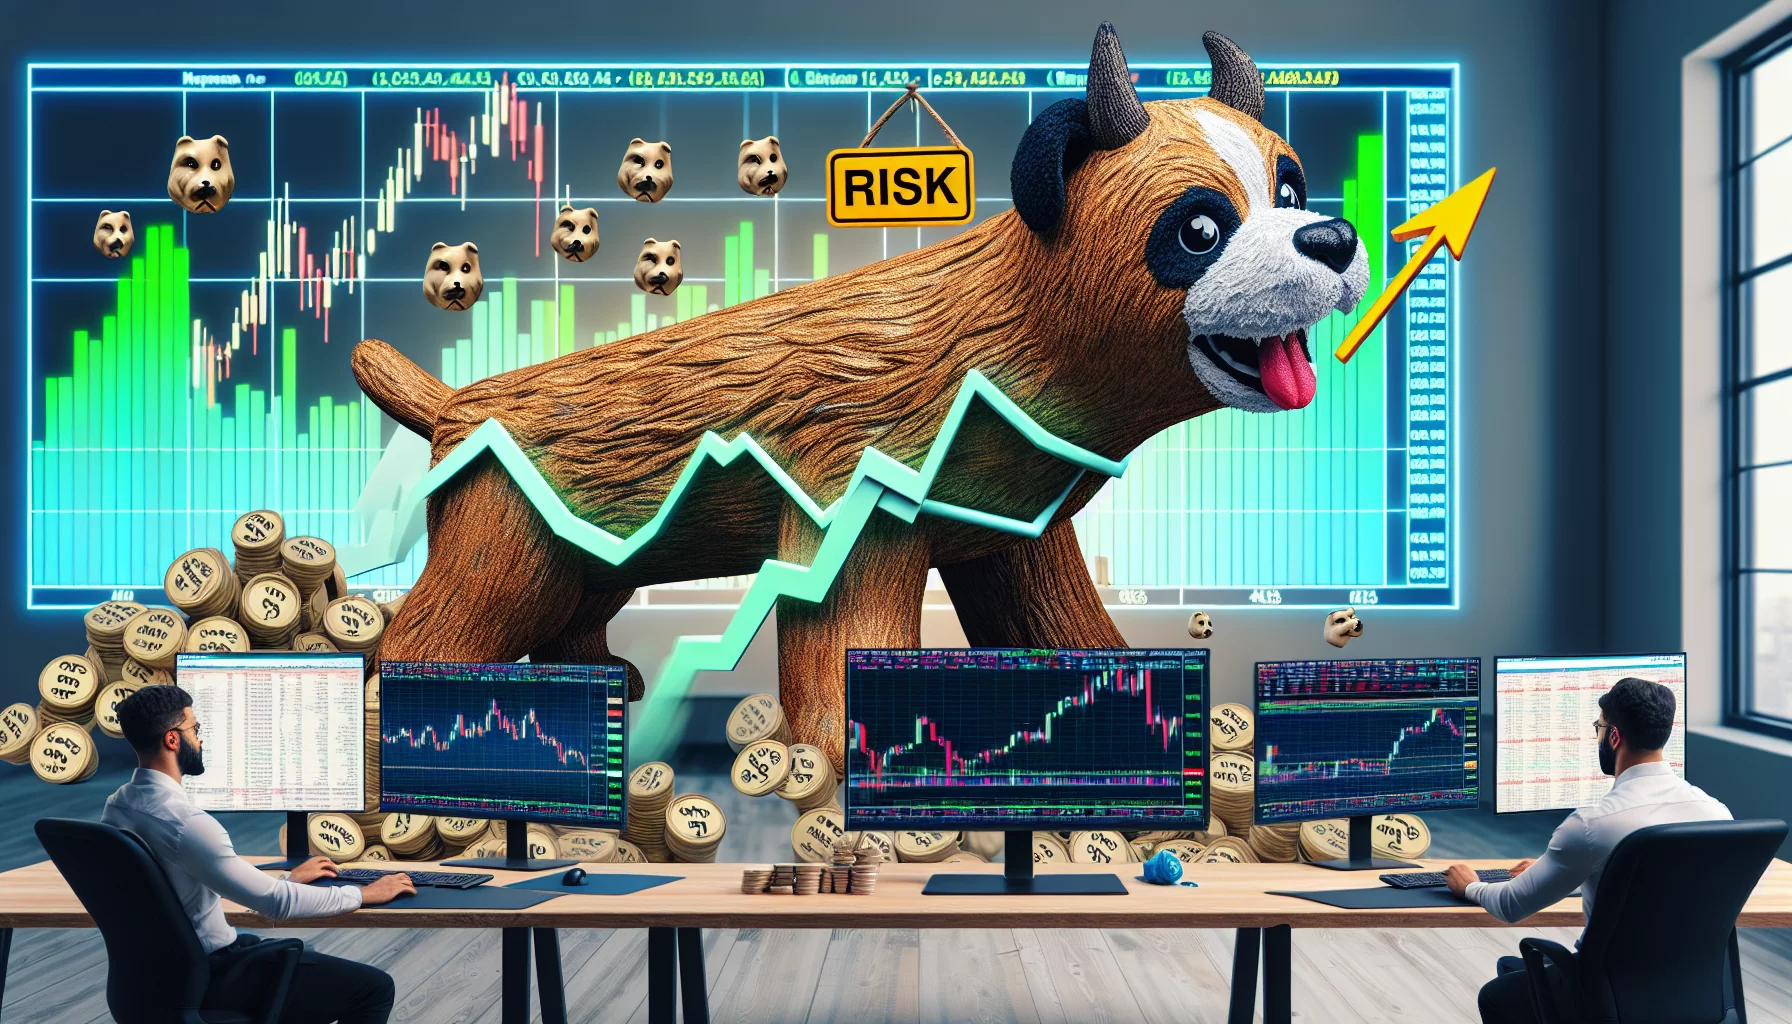 Chewy joins the ranks of meme stocks: implications and risks explained